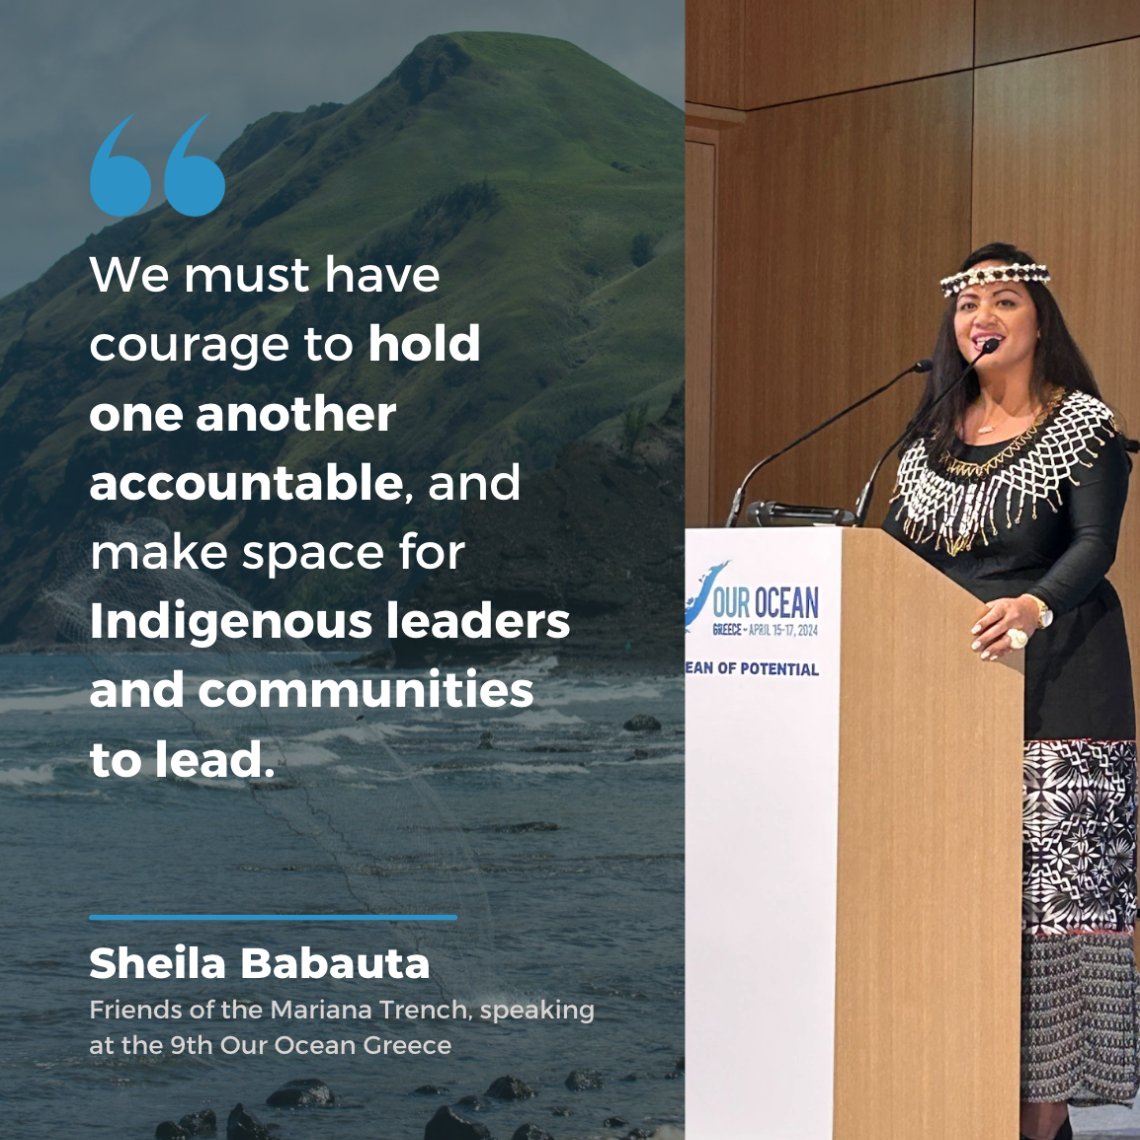 'MPAs that are designated & implemented the right way shows our deep love & respect for the ocean. We must have courage to hold one another accountable & make space for Indigenous leaders & communities to lead.” -@FriendsTrench's @sheilababauta speaking at @OurOceanGreece.